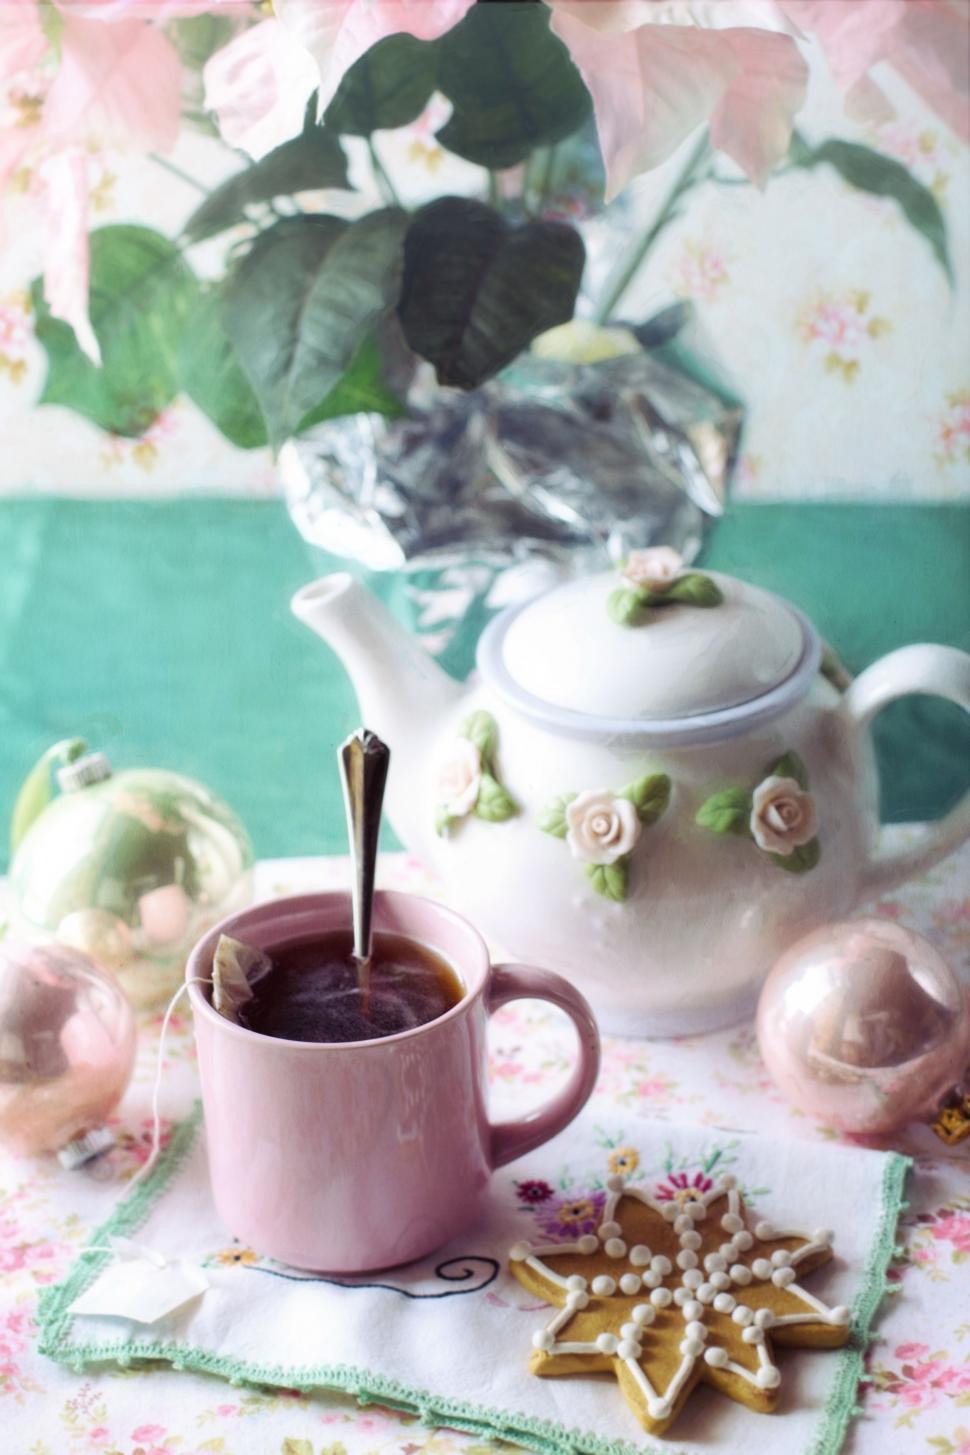 Free Image of Tea and Star Cookie with Teapot  